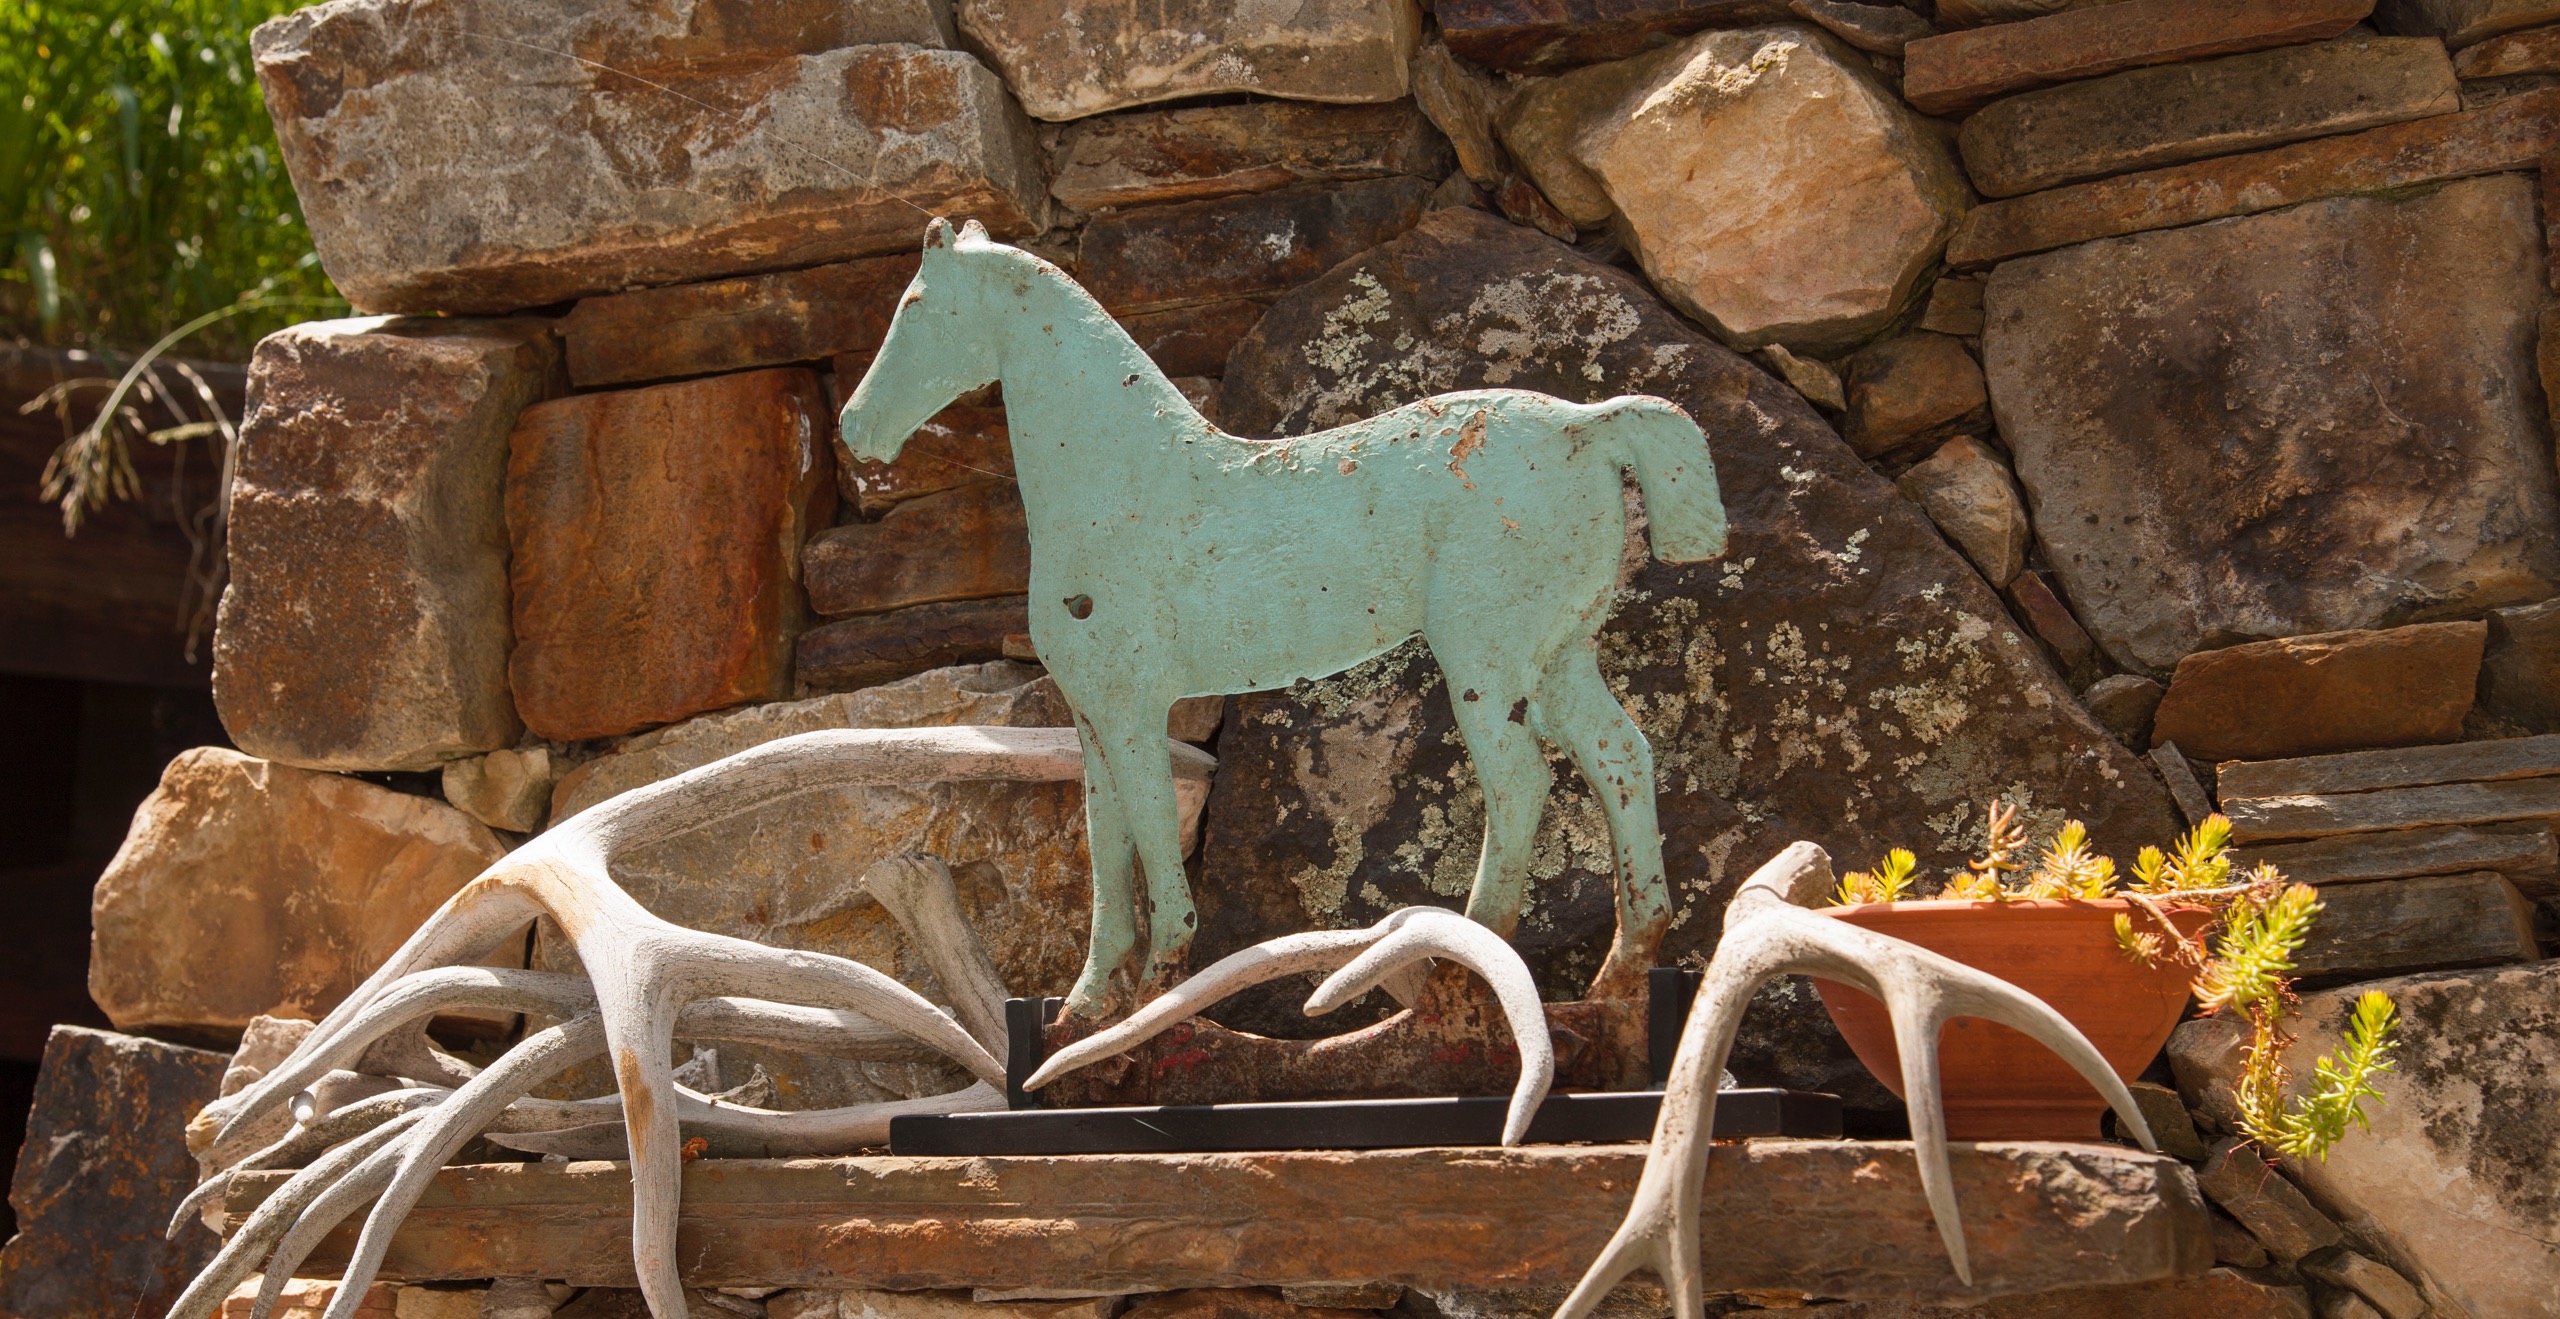 Buffy Birrittella’s rustic Utah getaway is home to all kinds of horses—the one she rides and the ones she collects. Here, a blue horse windmill weight surrounded by antlers